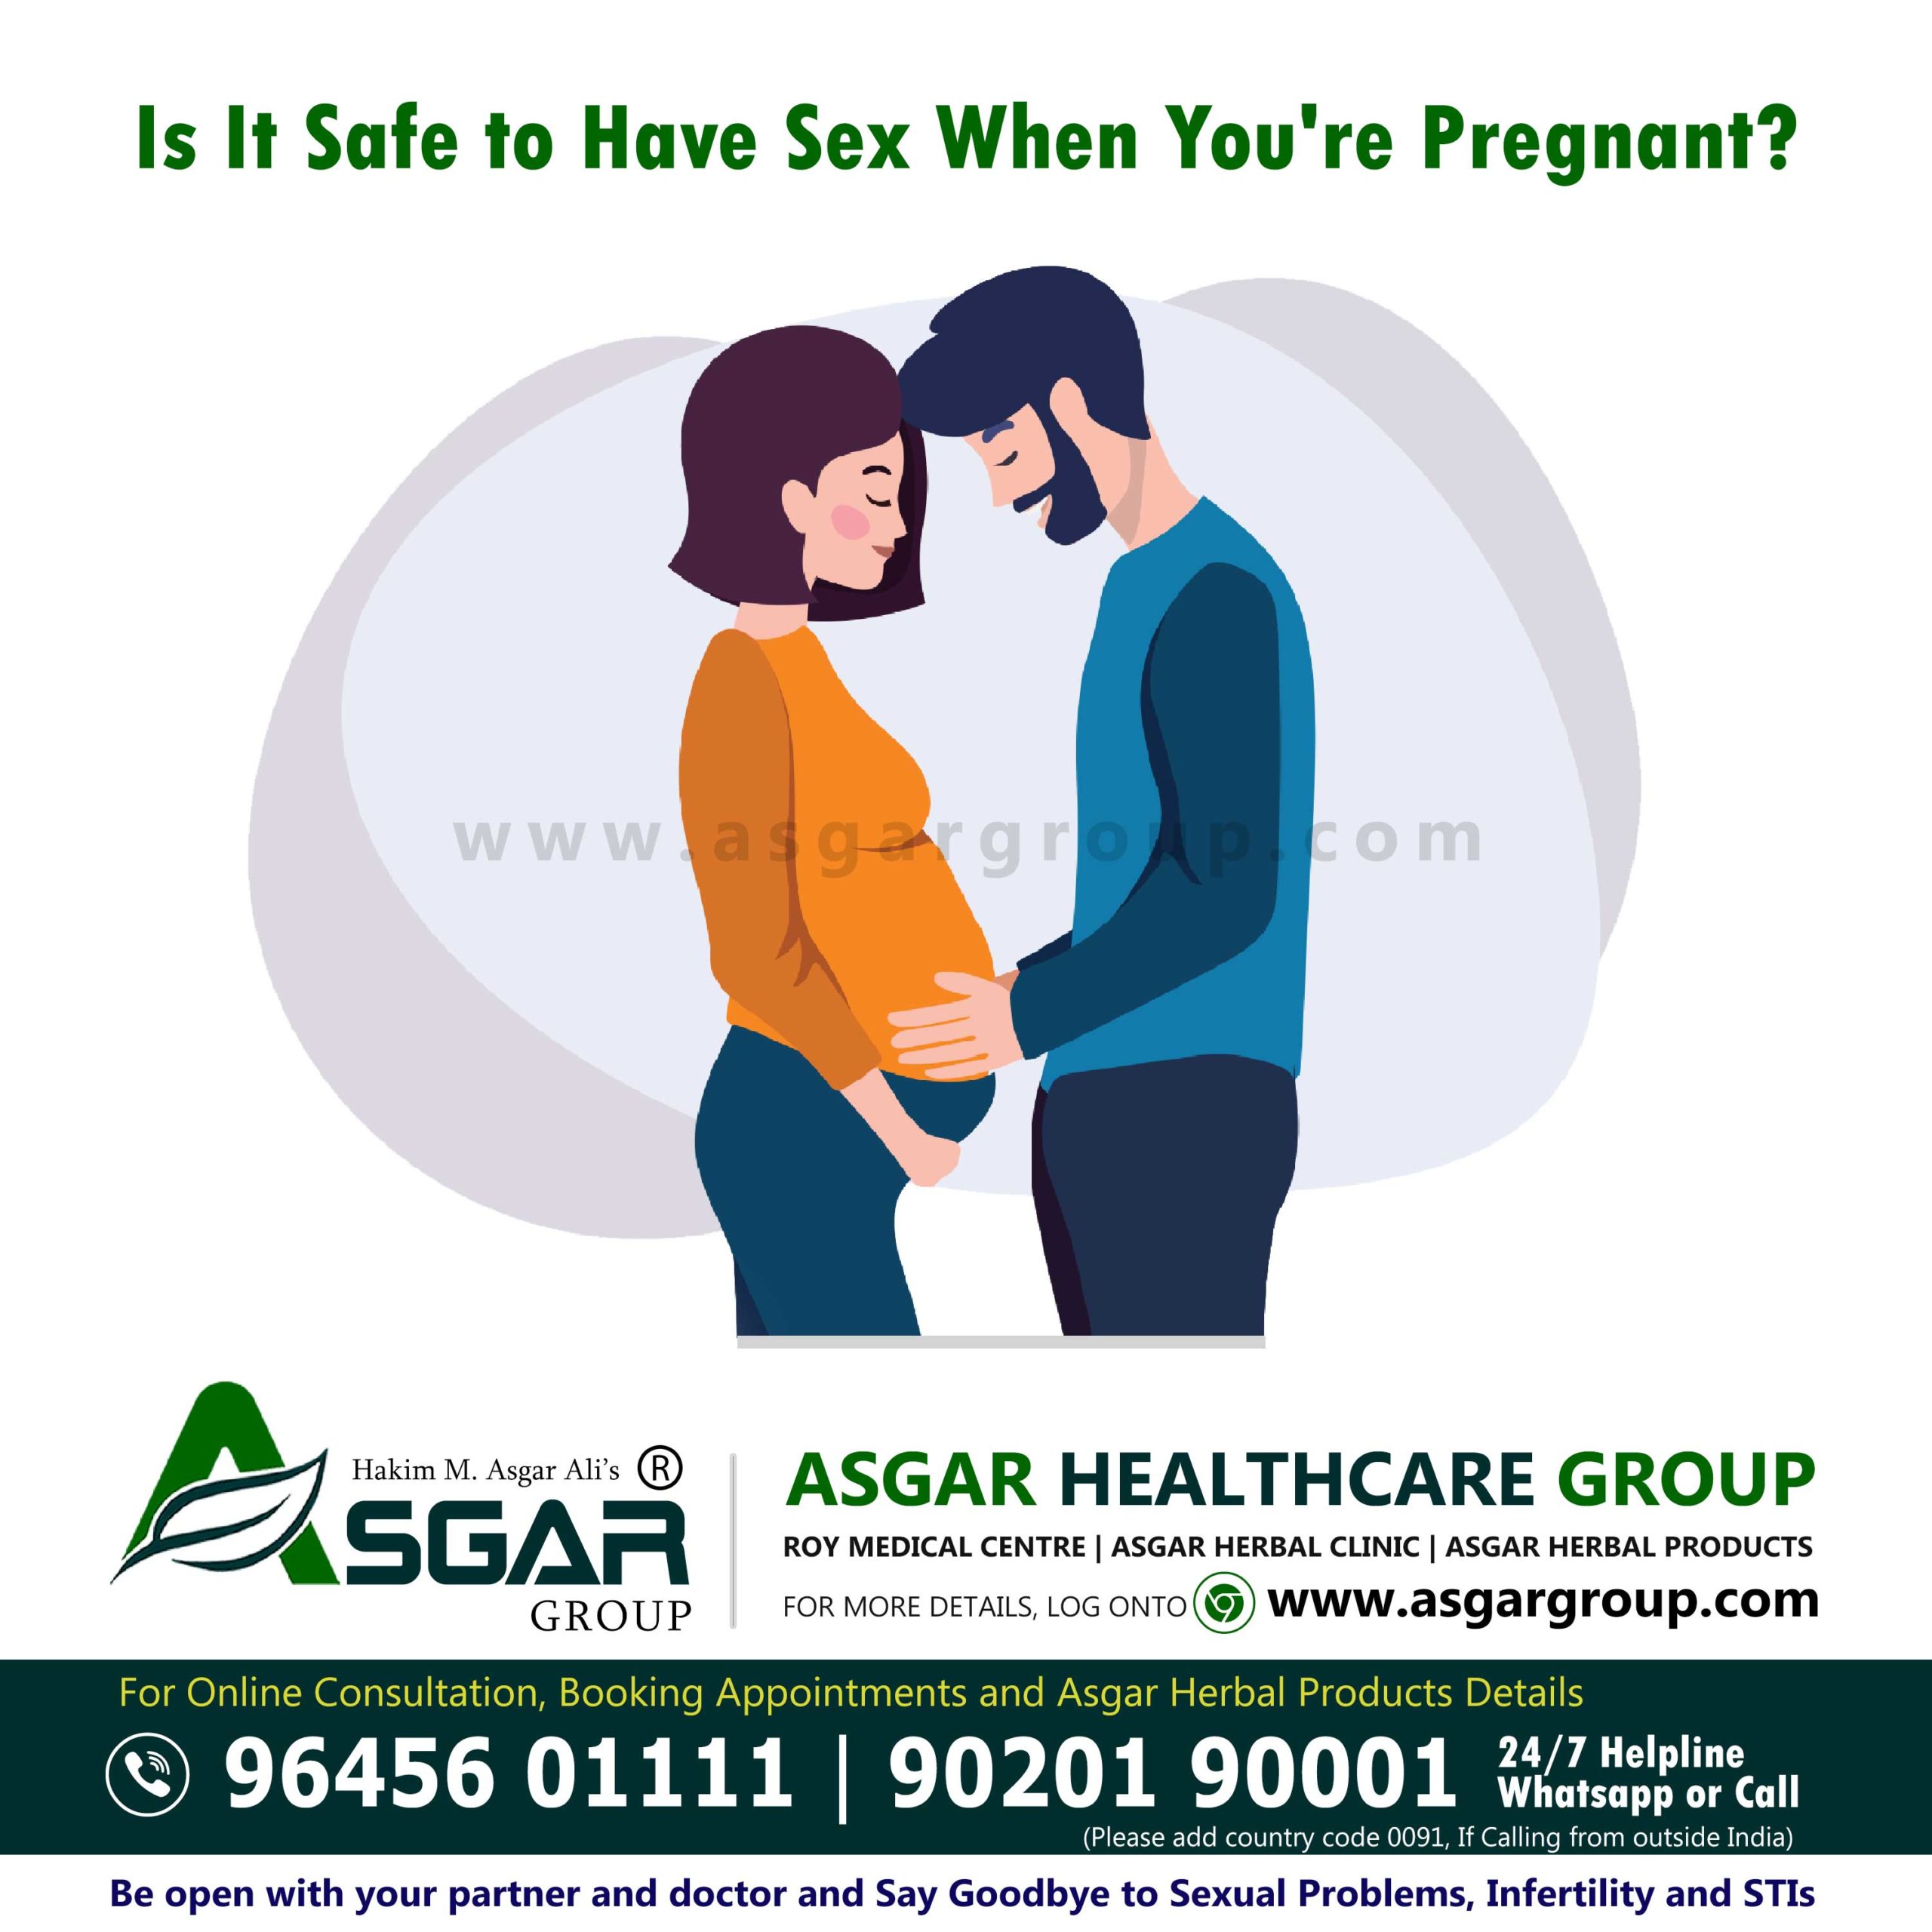 Benefits of sex during pregnancy sex positions and disadvantages asgar healthcare group scaled